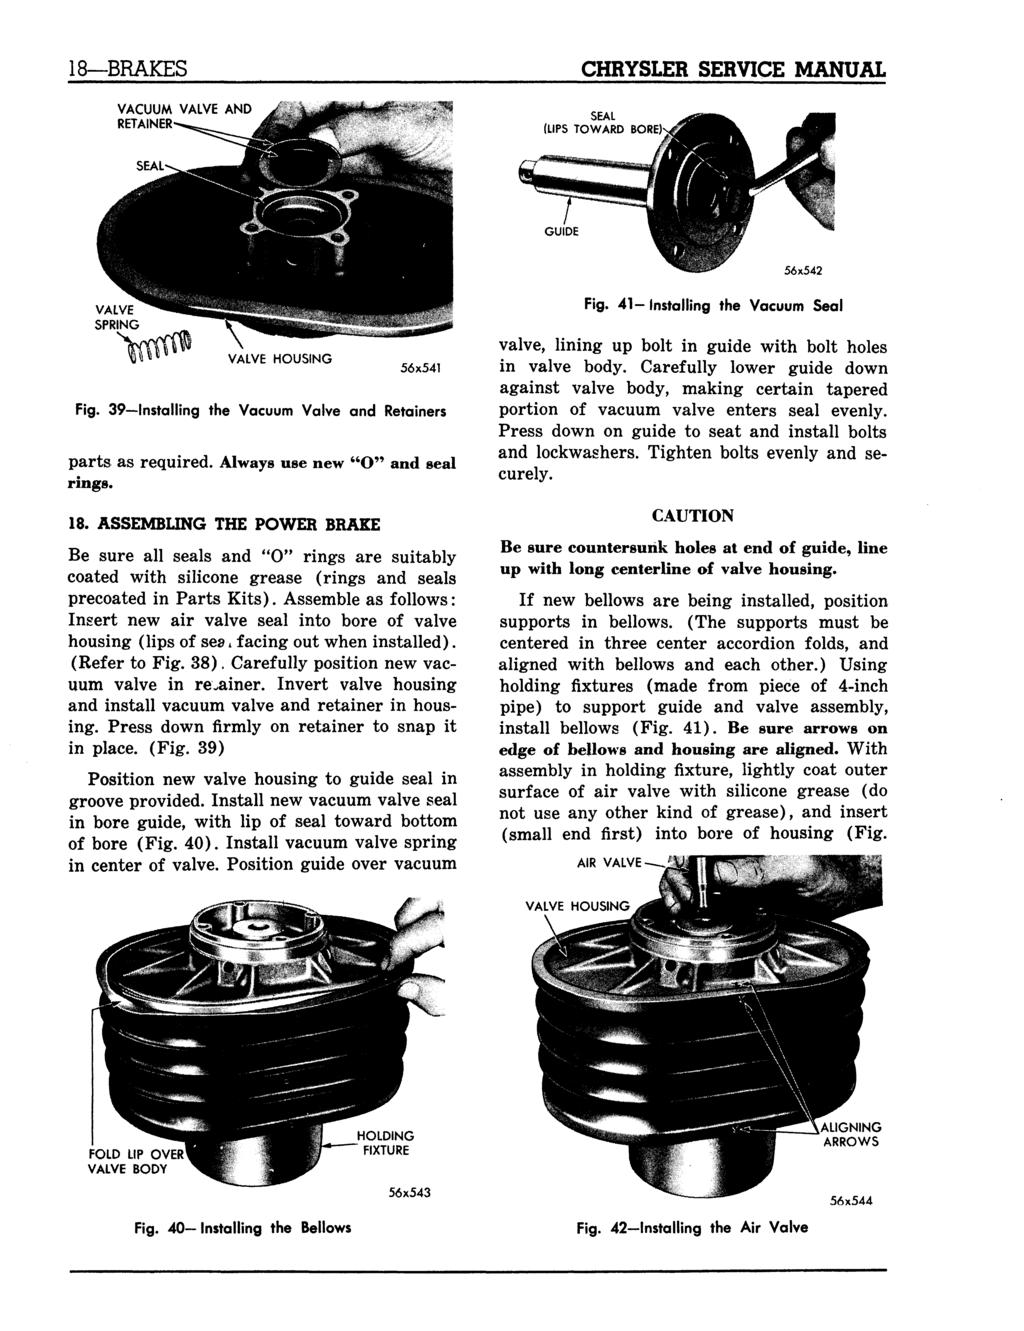 18 BRAKES VACUUM VALVE AND RETAINER CHRYSLER SERVICE MANUAL SEAL (LIPS TOWARD BOR GUIDE 56x542 Fig. 41- Installing the Vacuum Seal Fig. 39 Installing the Vacuum Valve and Retainers parts as required.